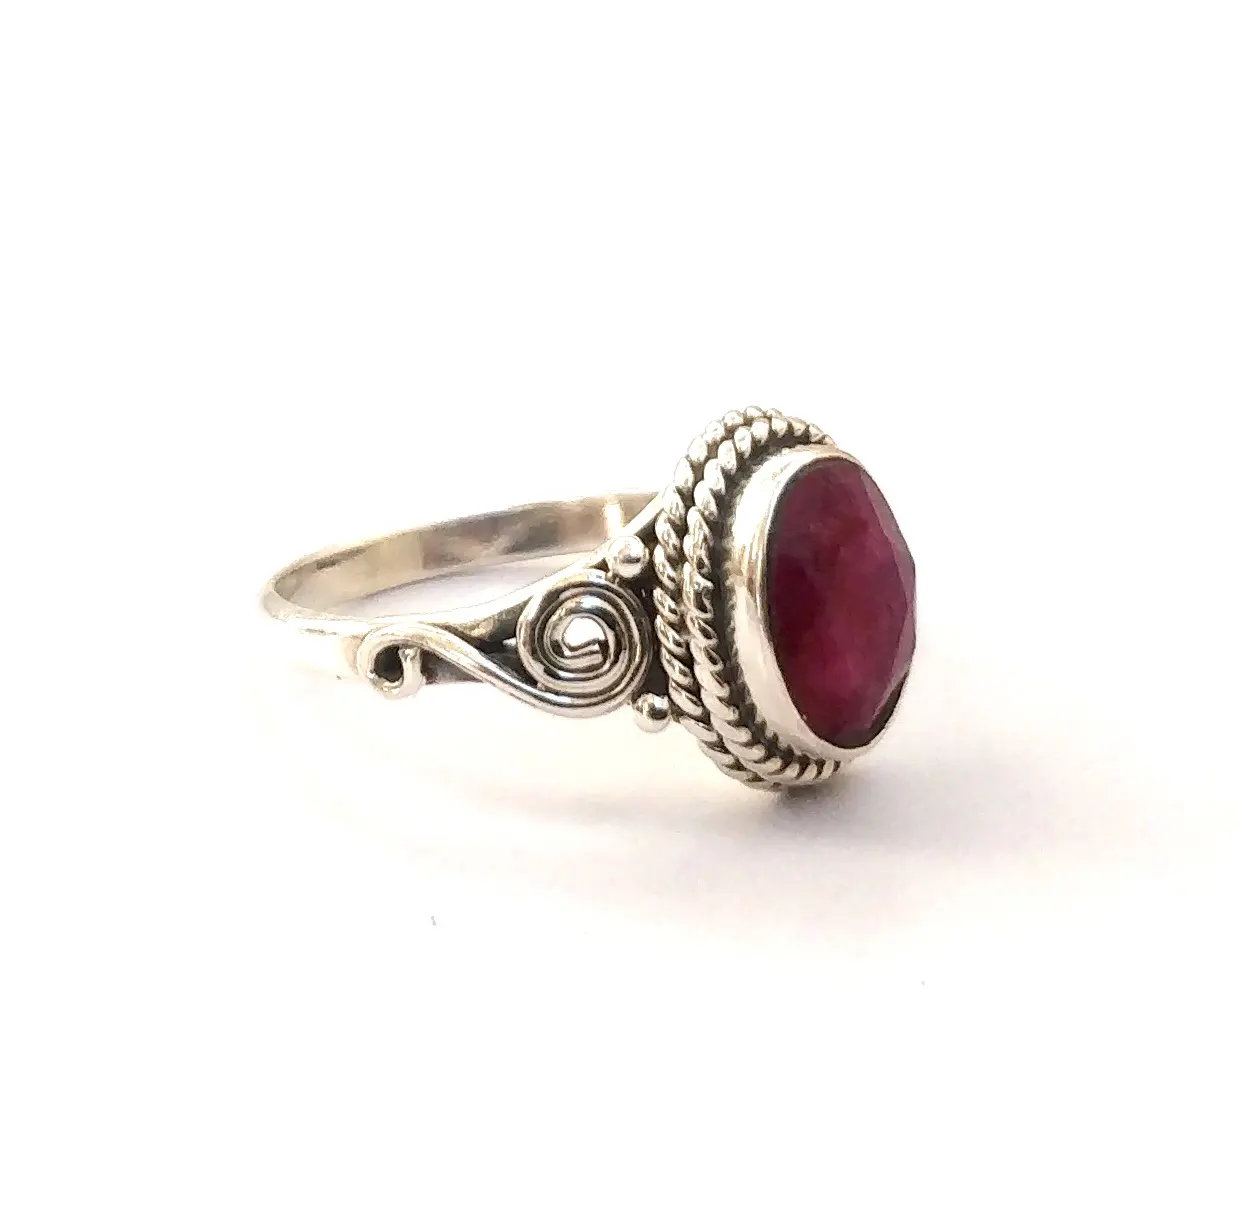 Bezel Handmade simple Natural Indian ruby Stone designs Silver 925 red stone finger stone rings women